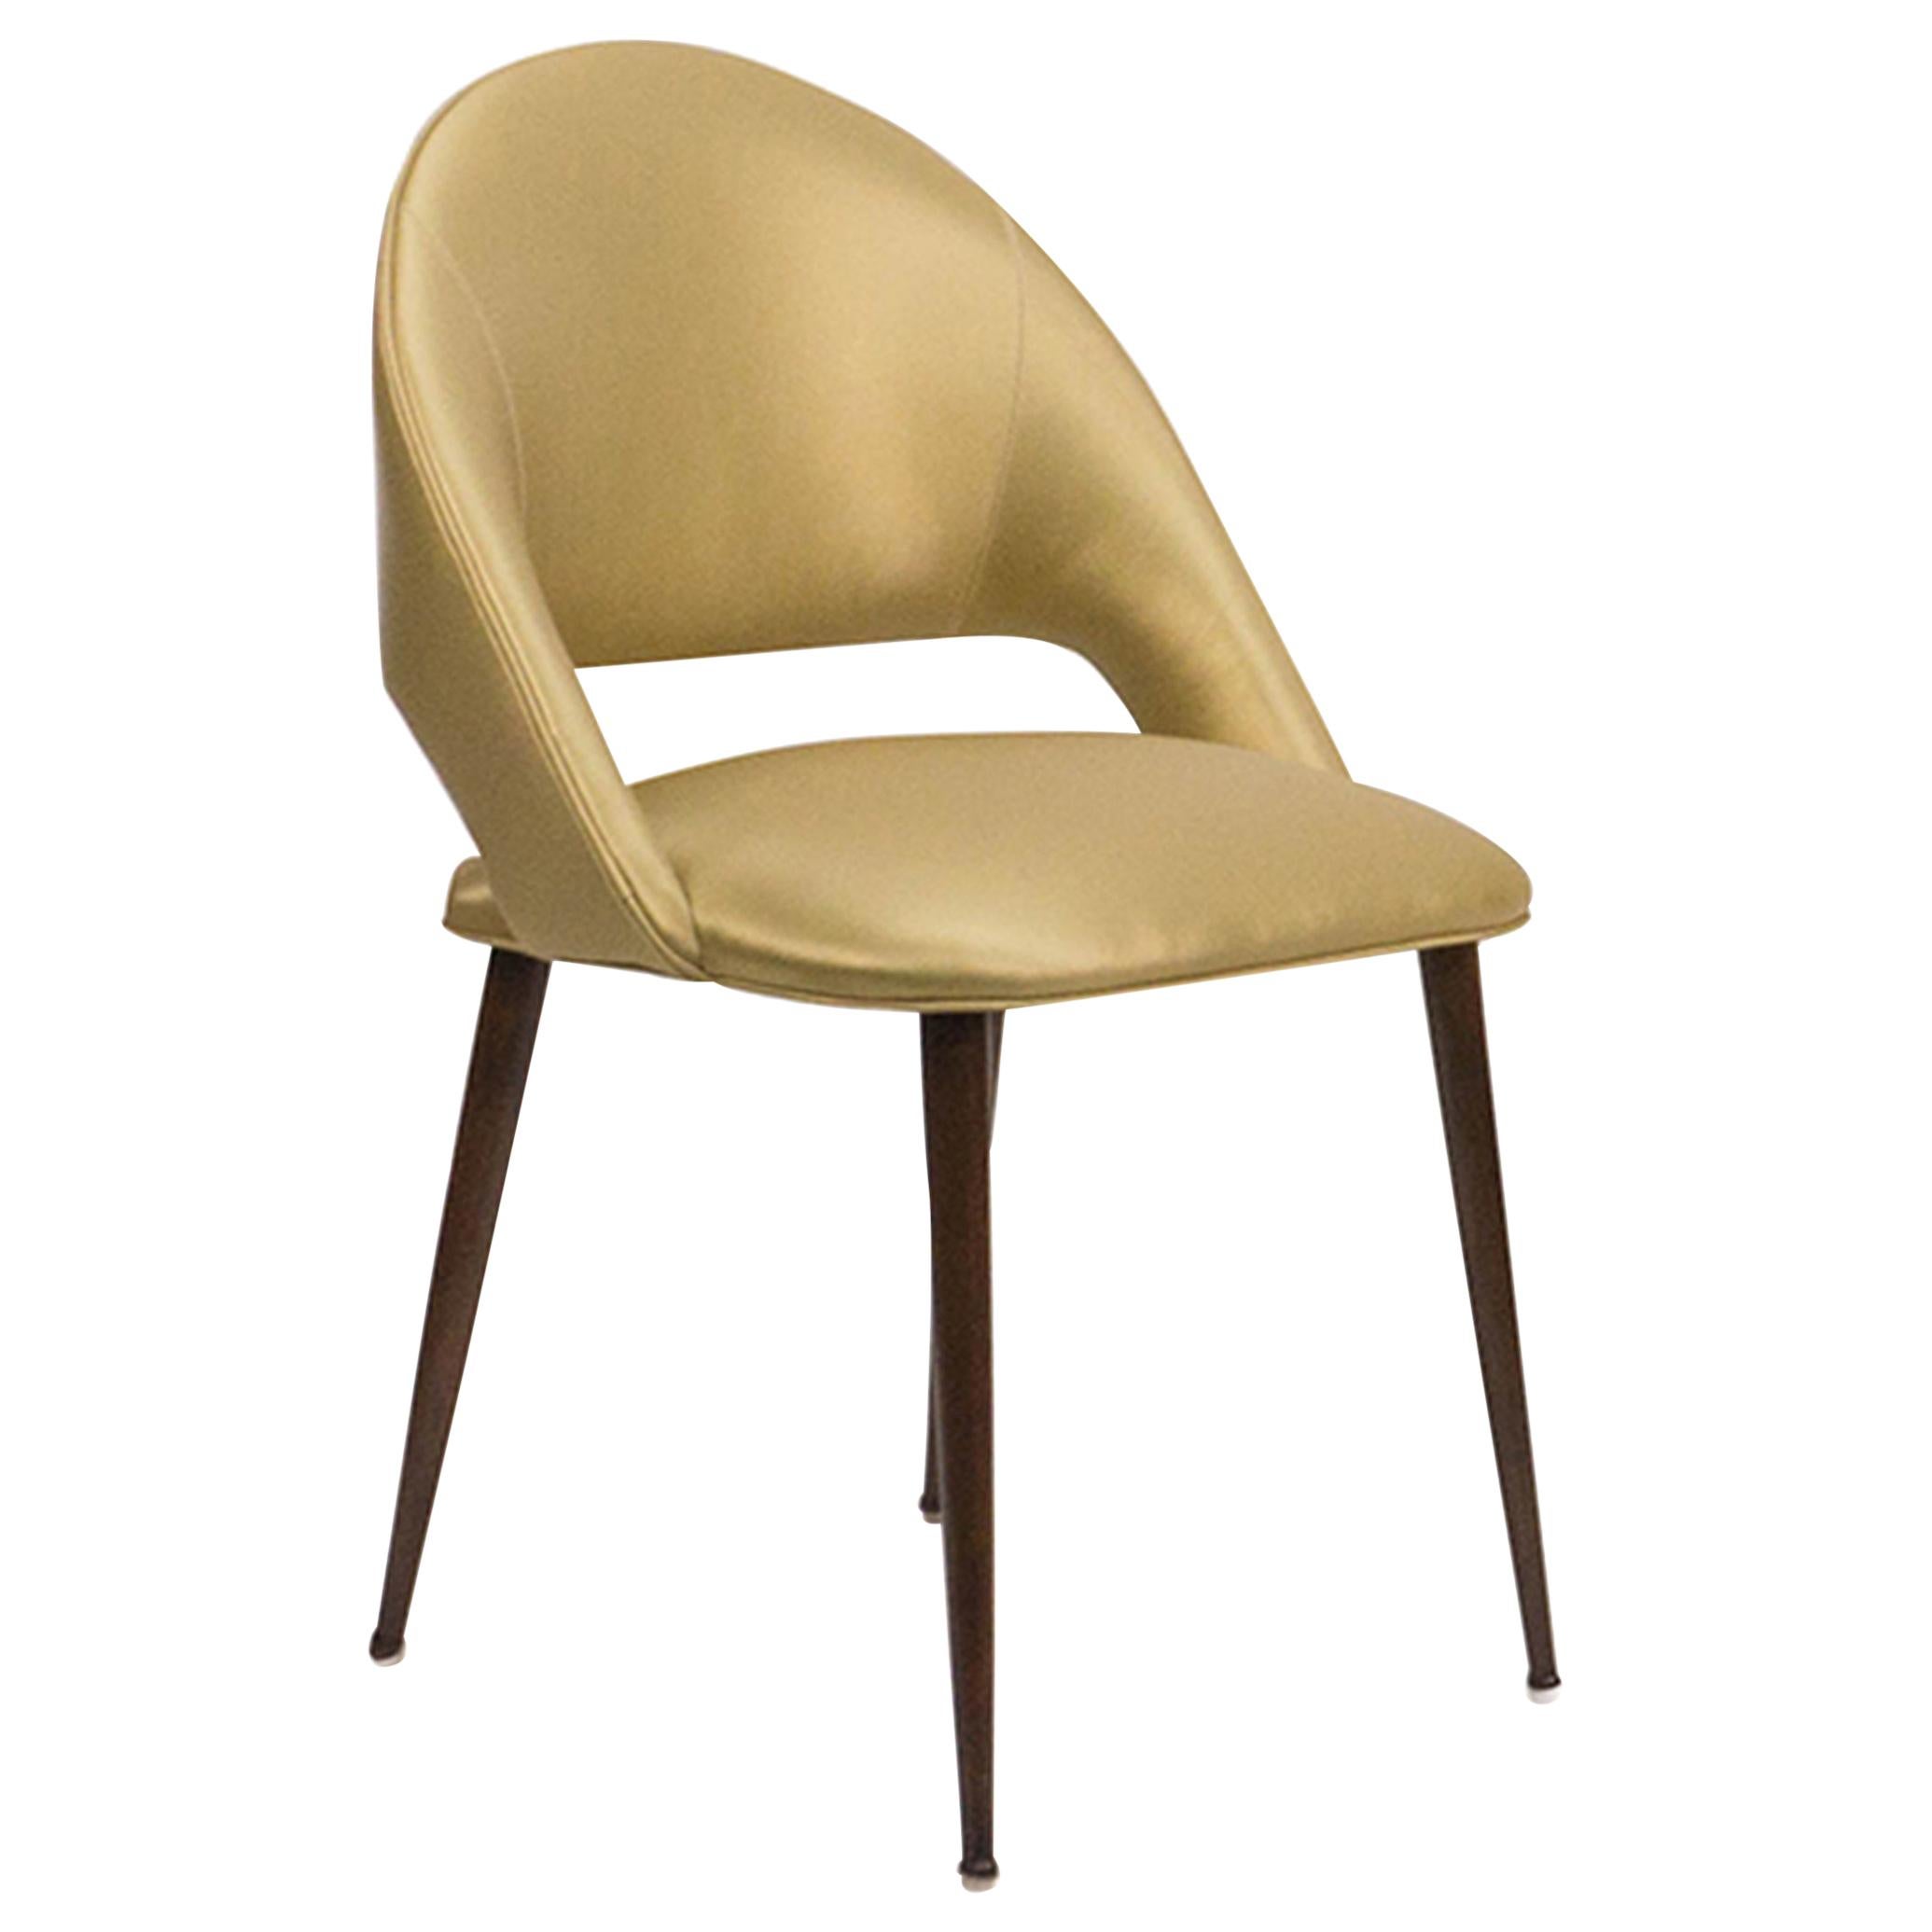 Art Deco Style Dining Chair with Round Legs and Vinyl Upholstery 'Customizable'